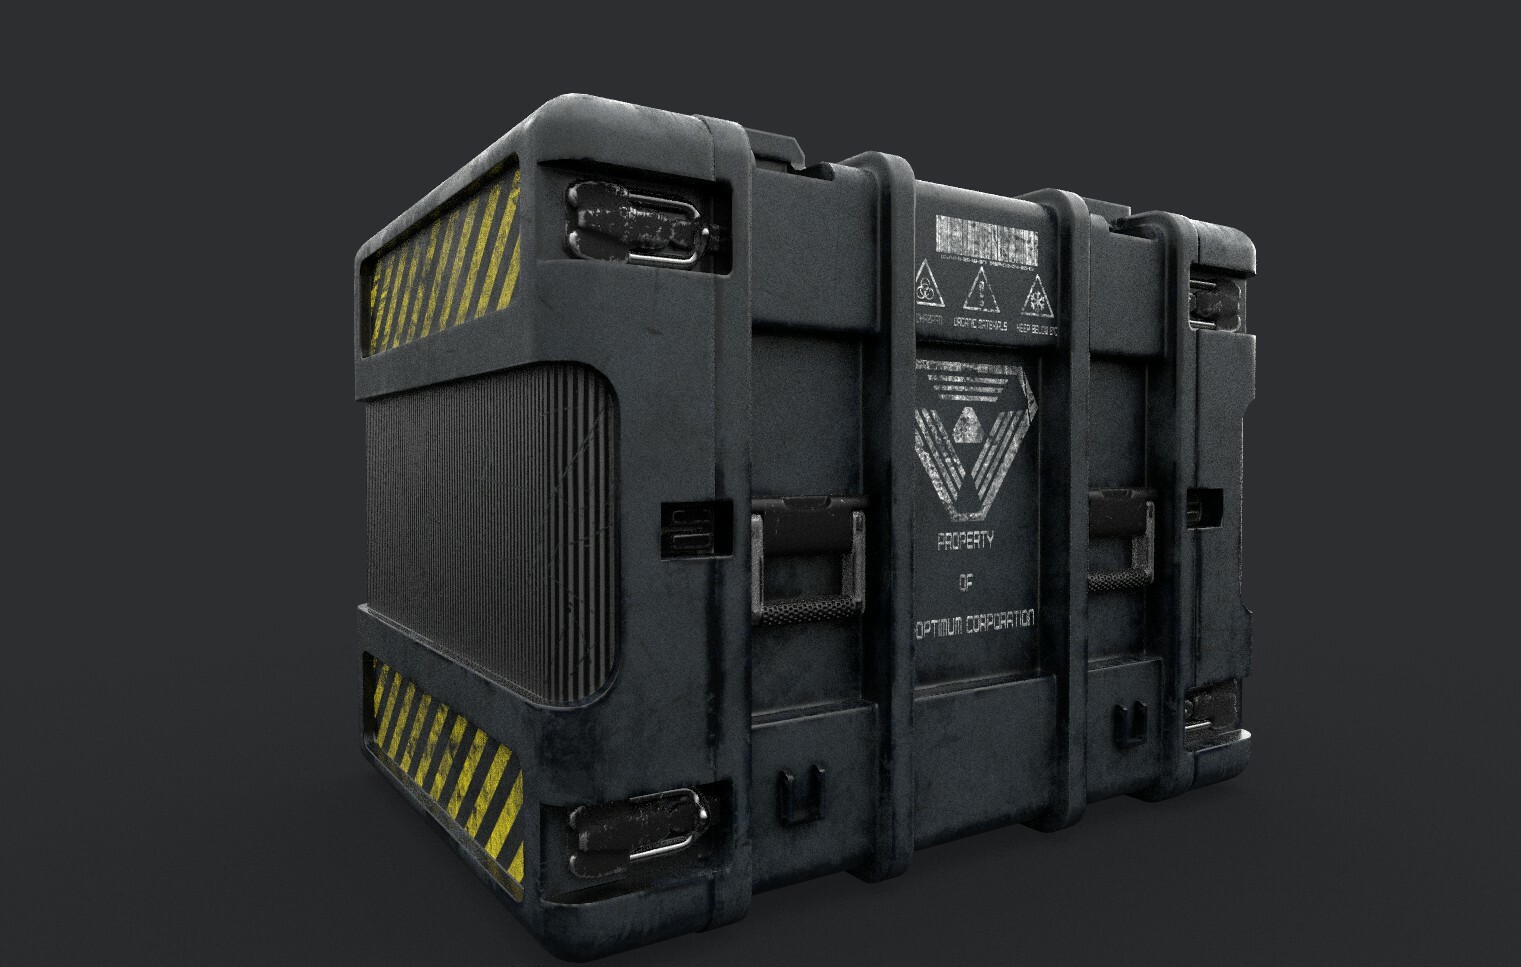 Final render of the crate in Substance Painter.